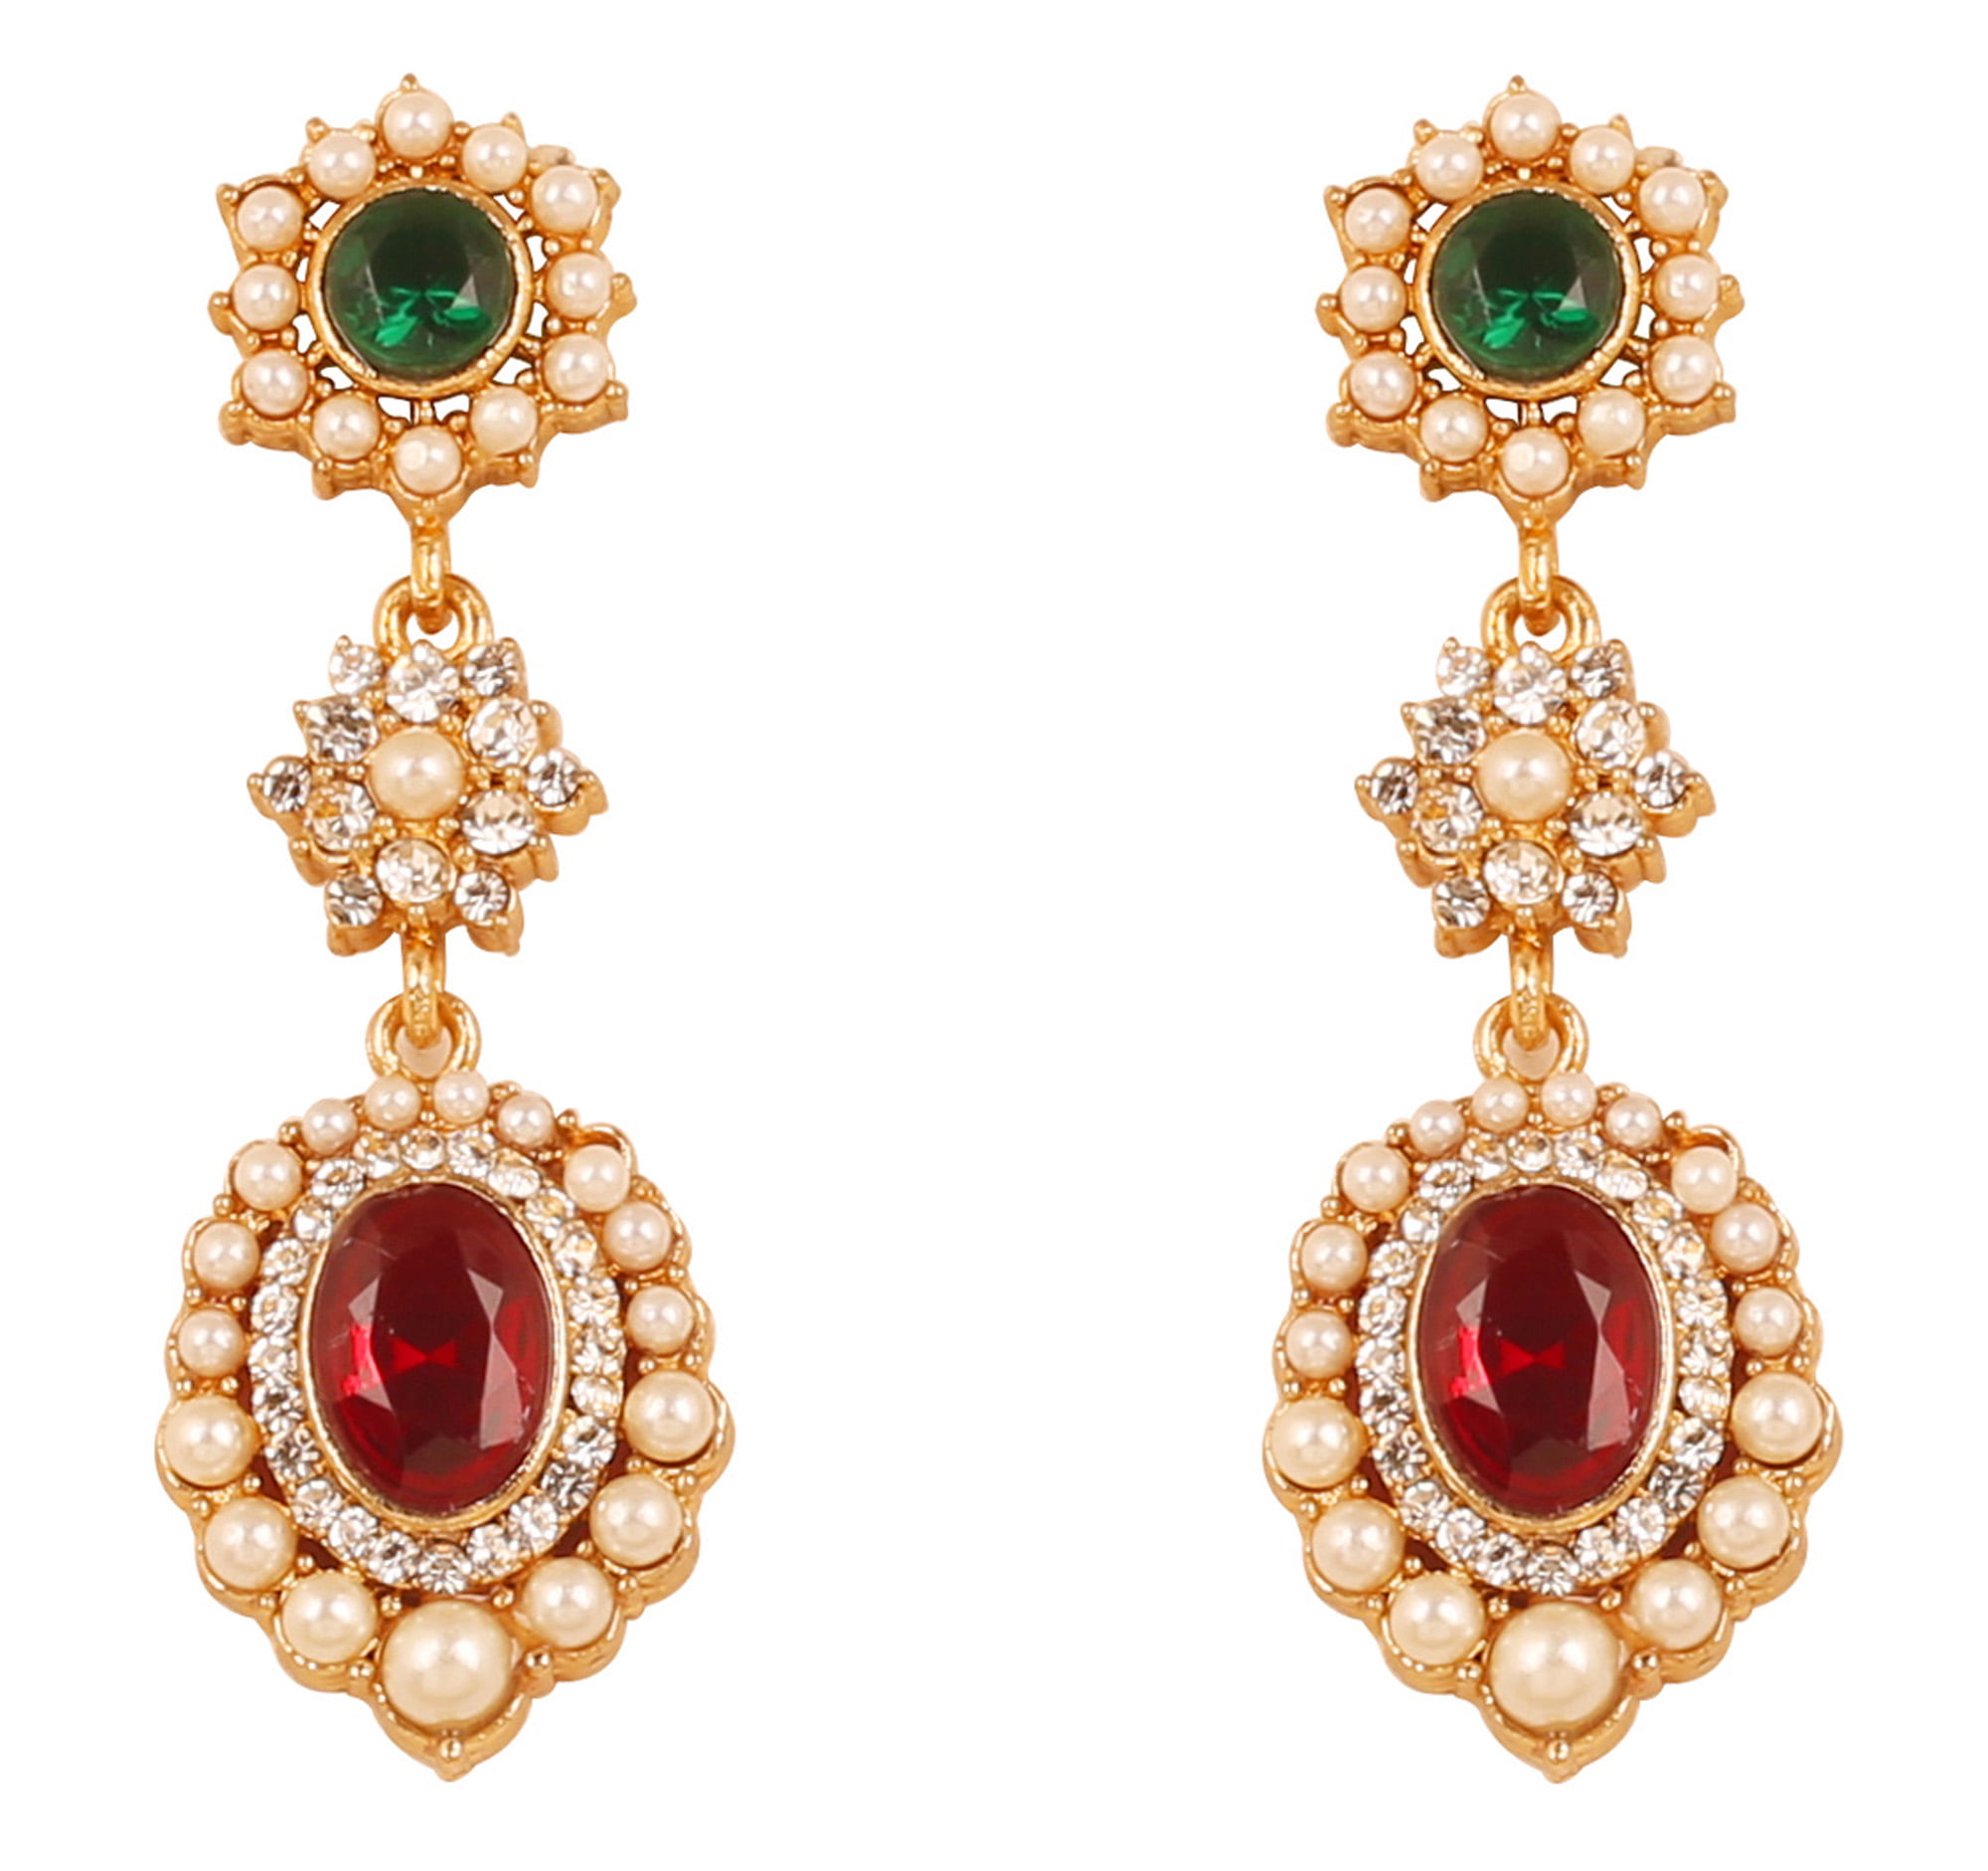 High Quality Gold Plated Cubic Zirconia & Pink Ruby Stones Studded Oval Shape Design Drop Earring For Women|Bollywood Fashion Indian Jewelry